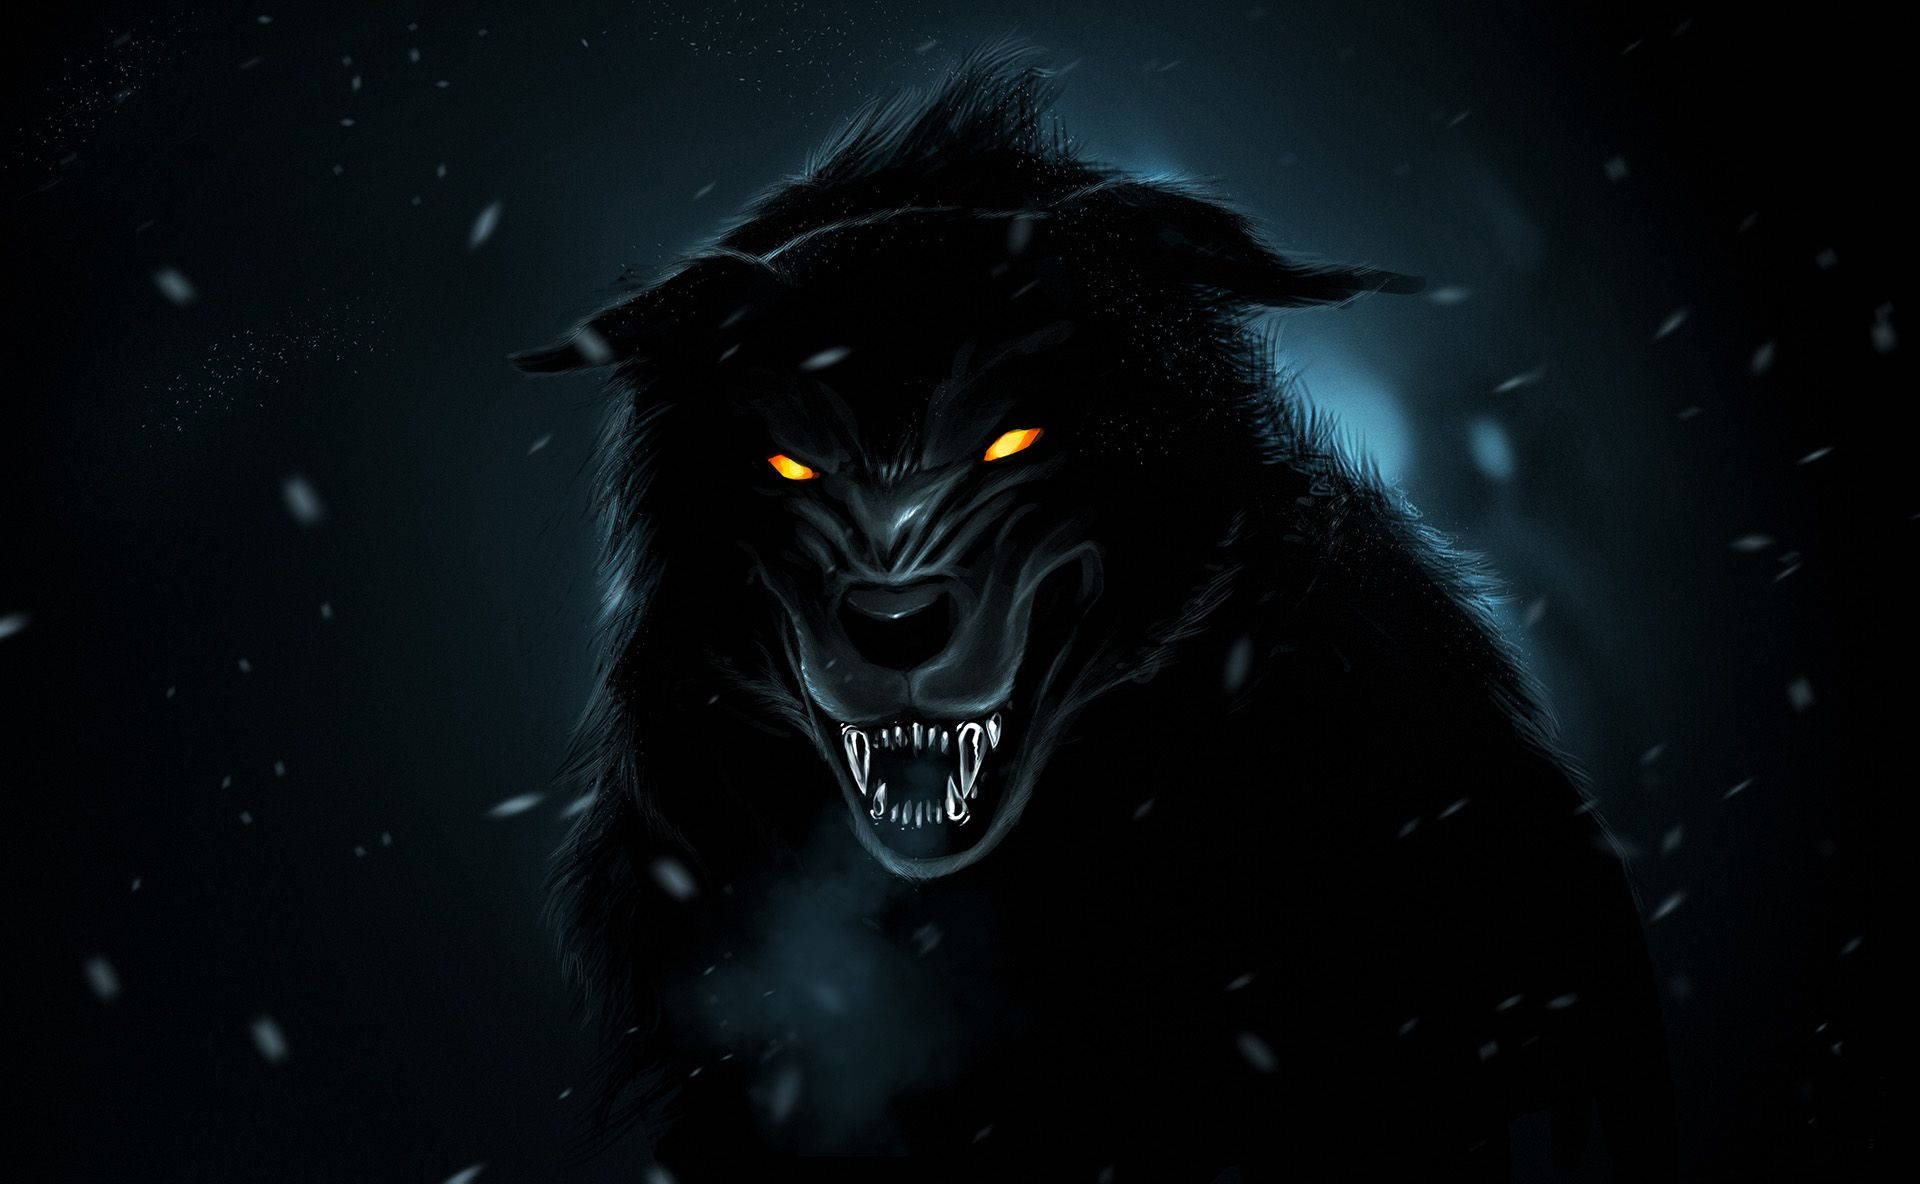 Majestic 3d Ghost Wolf In A Mysterious Dark Setting